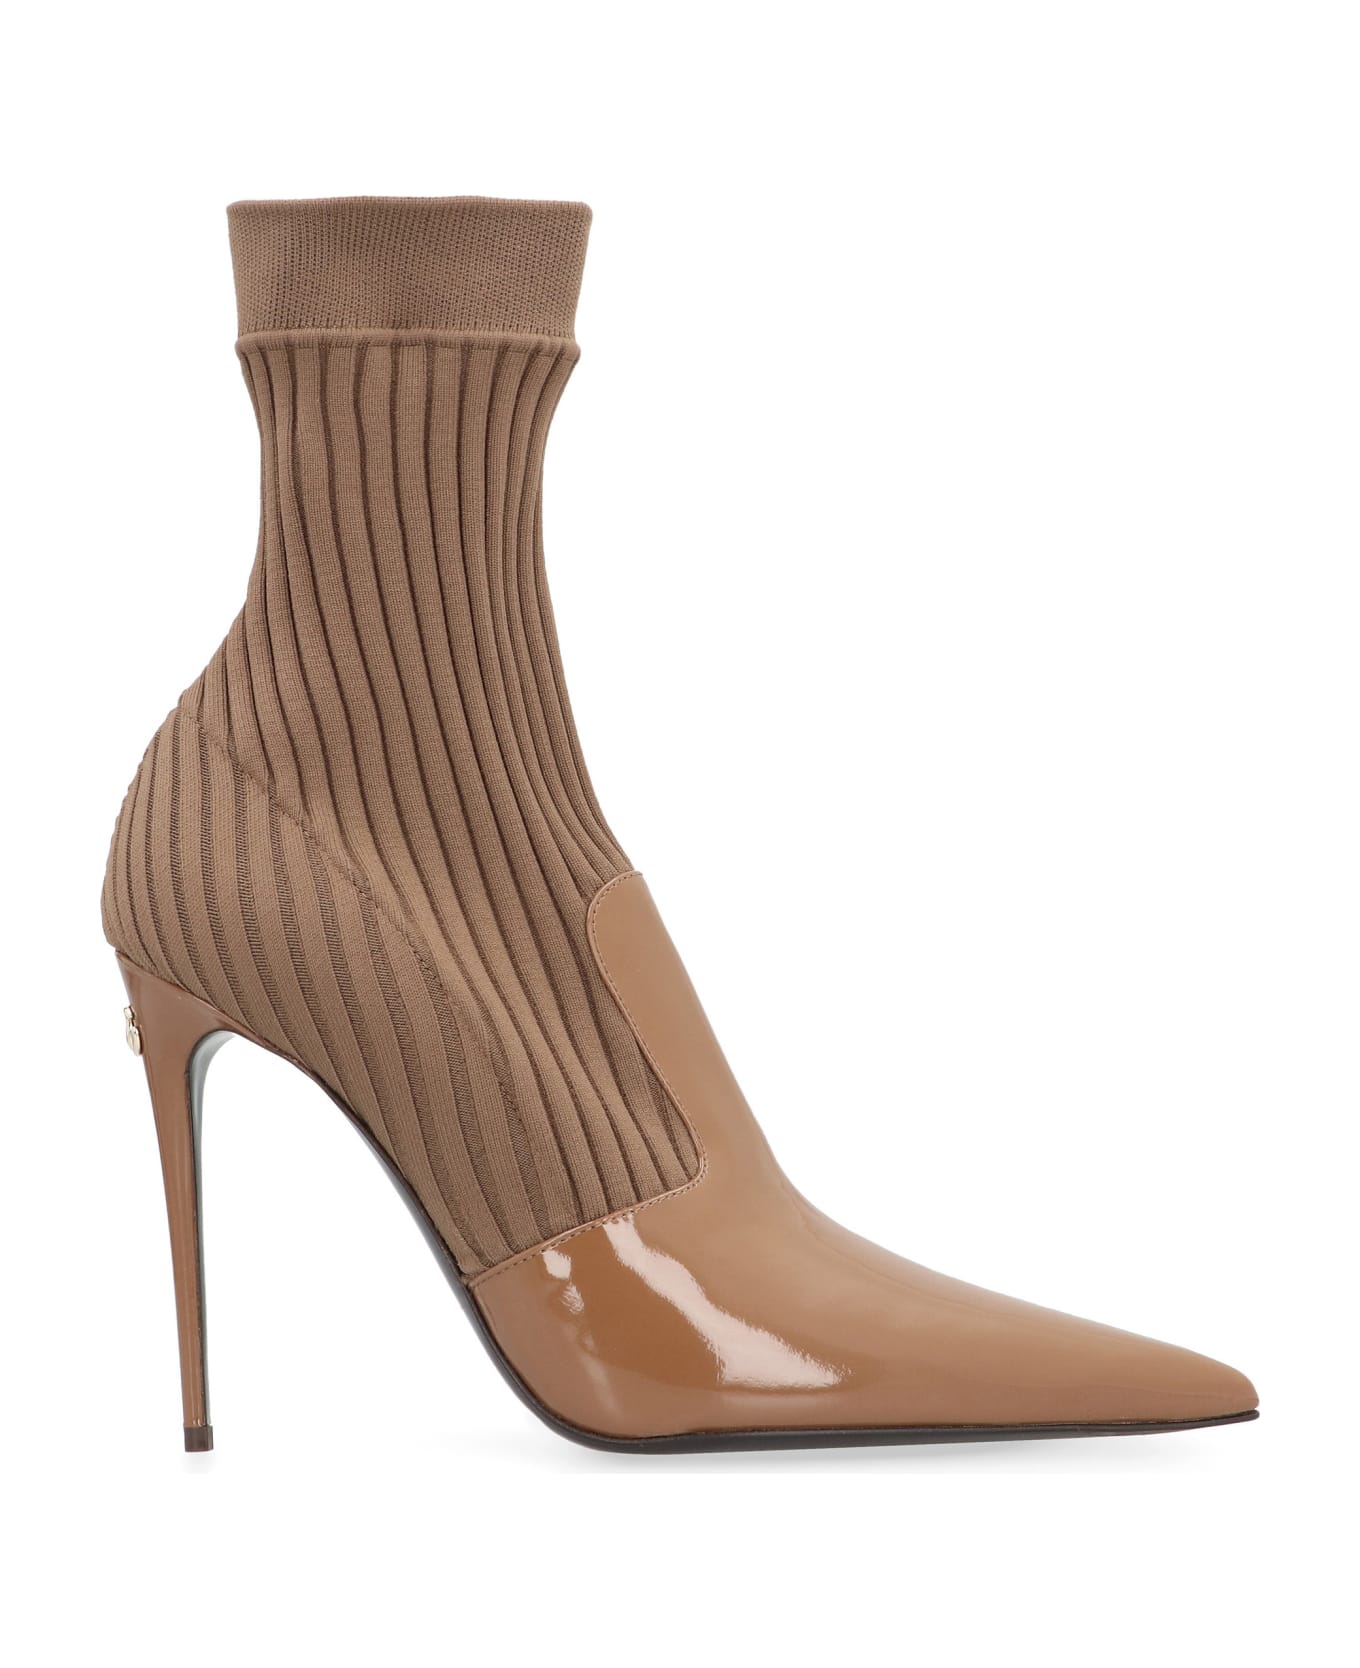 Dolce & Gabbana Sock Ankle Boots - Camel